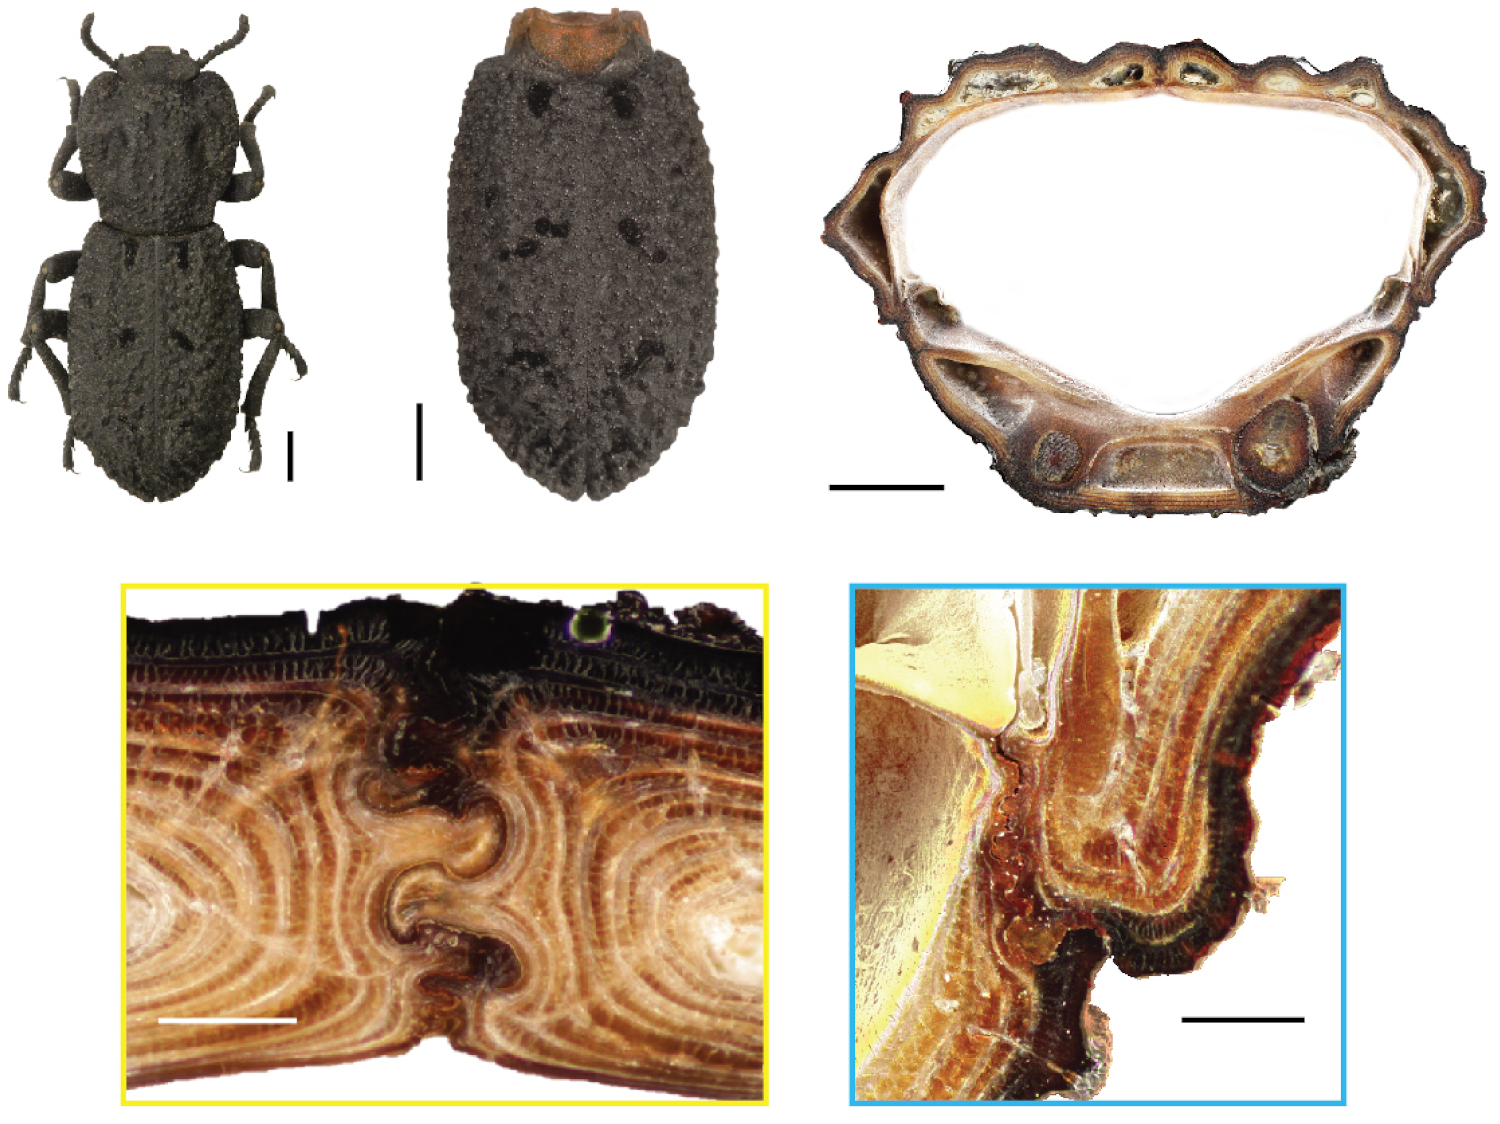 Images - These images show the diabolical ironclad beetle (top left) and how its abdomen (top middle and right) contains an internal architecture (bottom) featuring puzzle piece-like joints (bottom left) that make it incredibly crush-resistant. (Credit: UC Irvine)